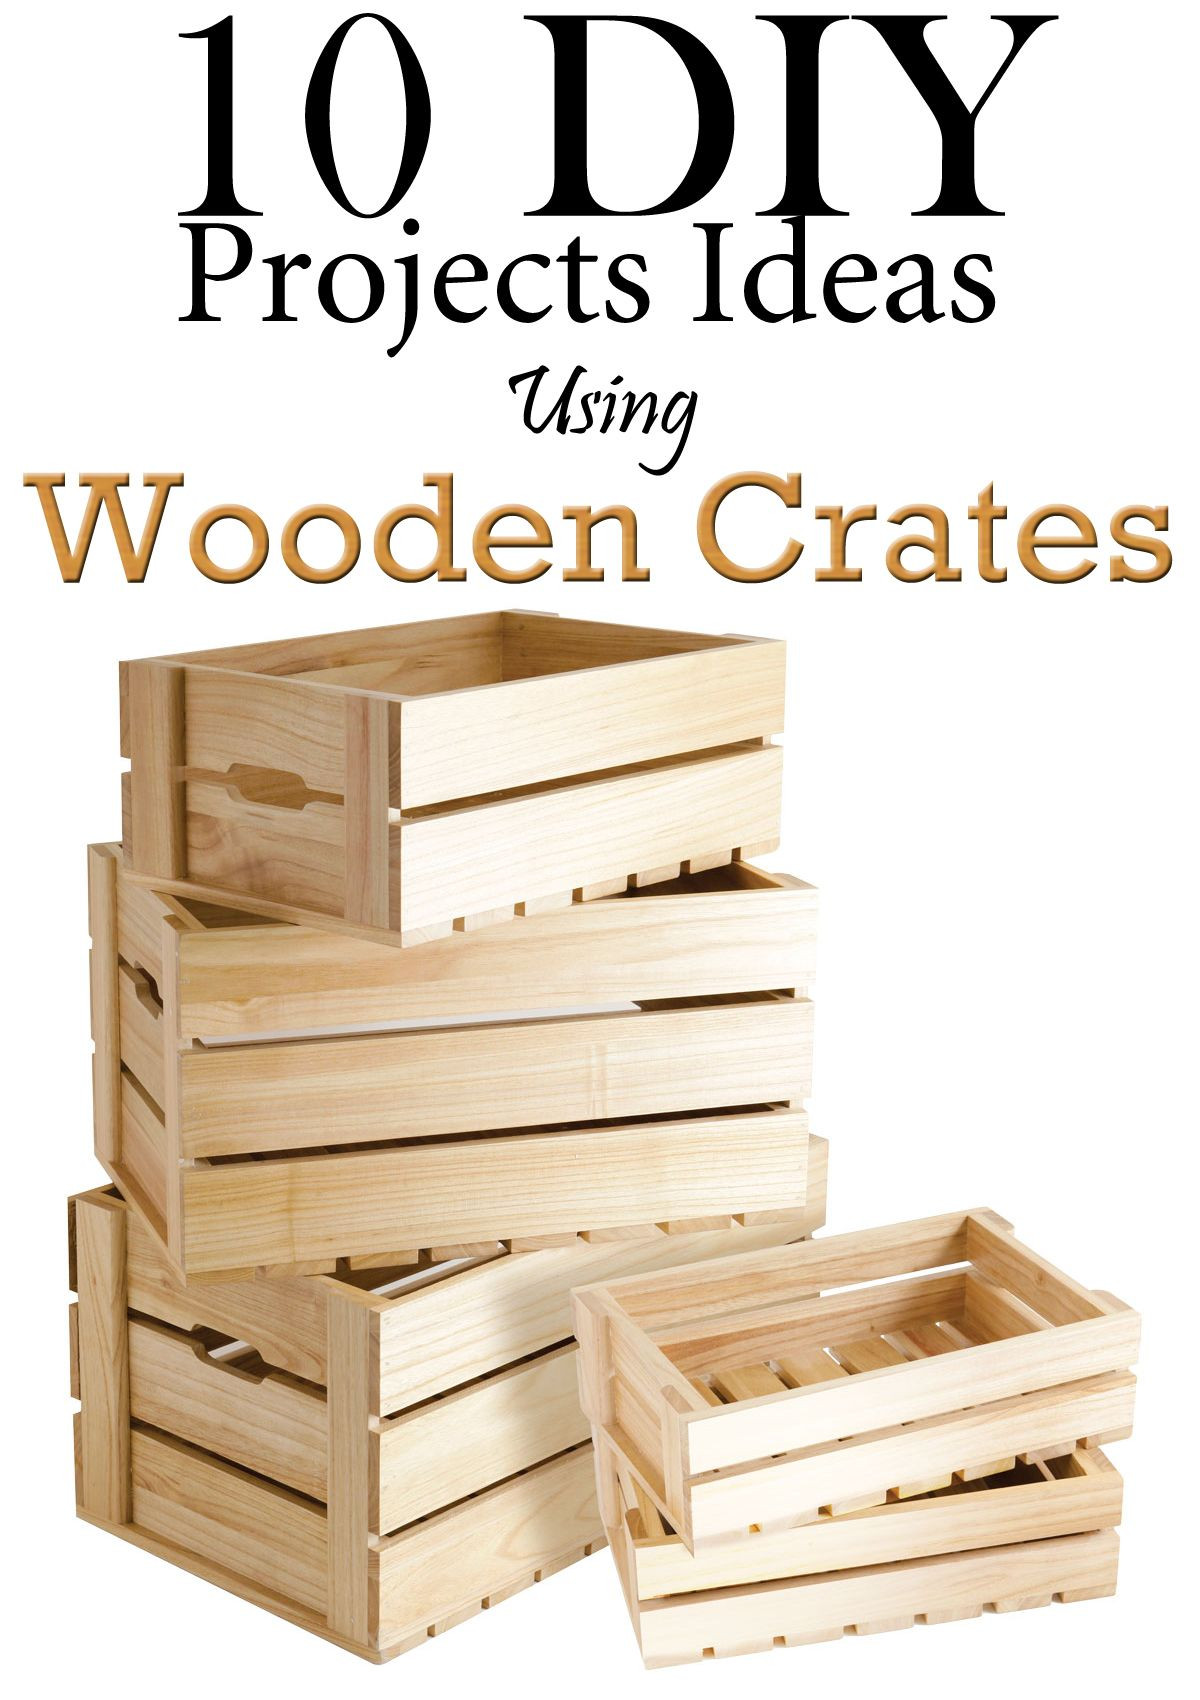 DIY Wooden Crates
 10 DIY Projects Ideas Using Wooden Crates kastes